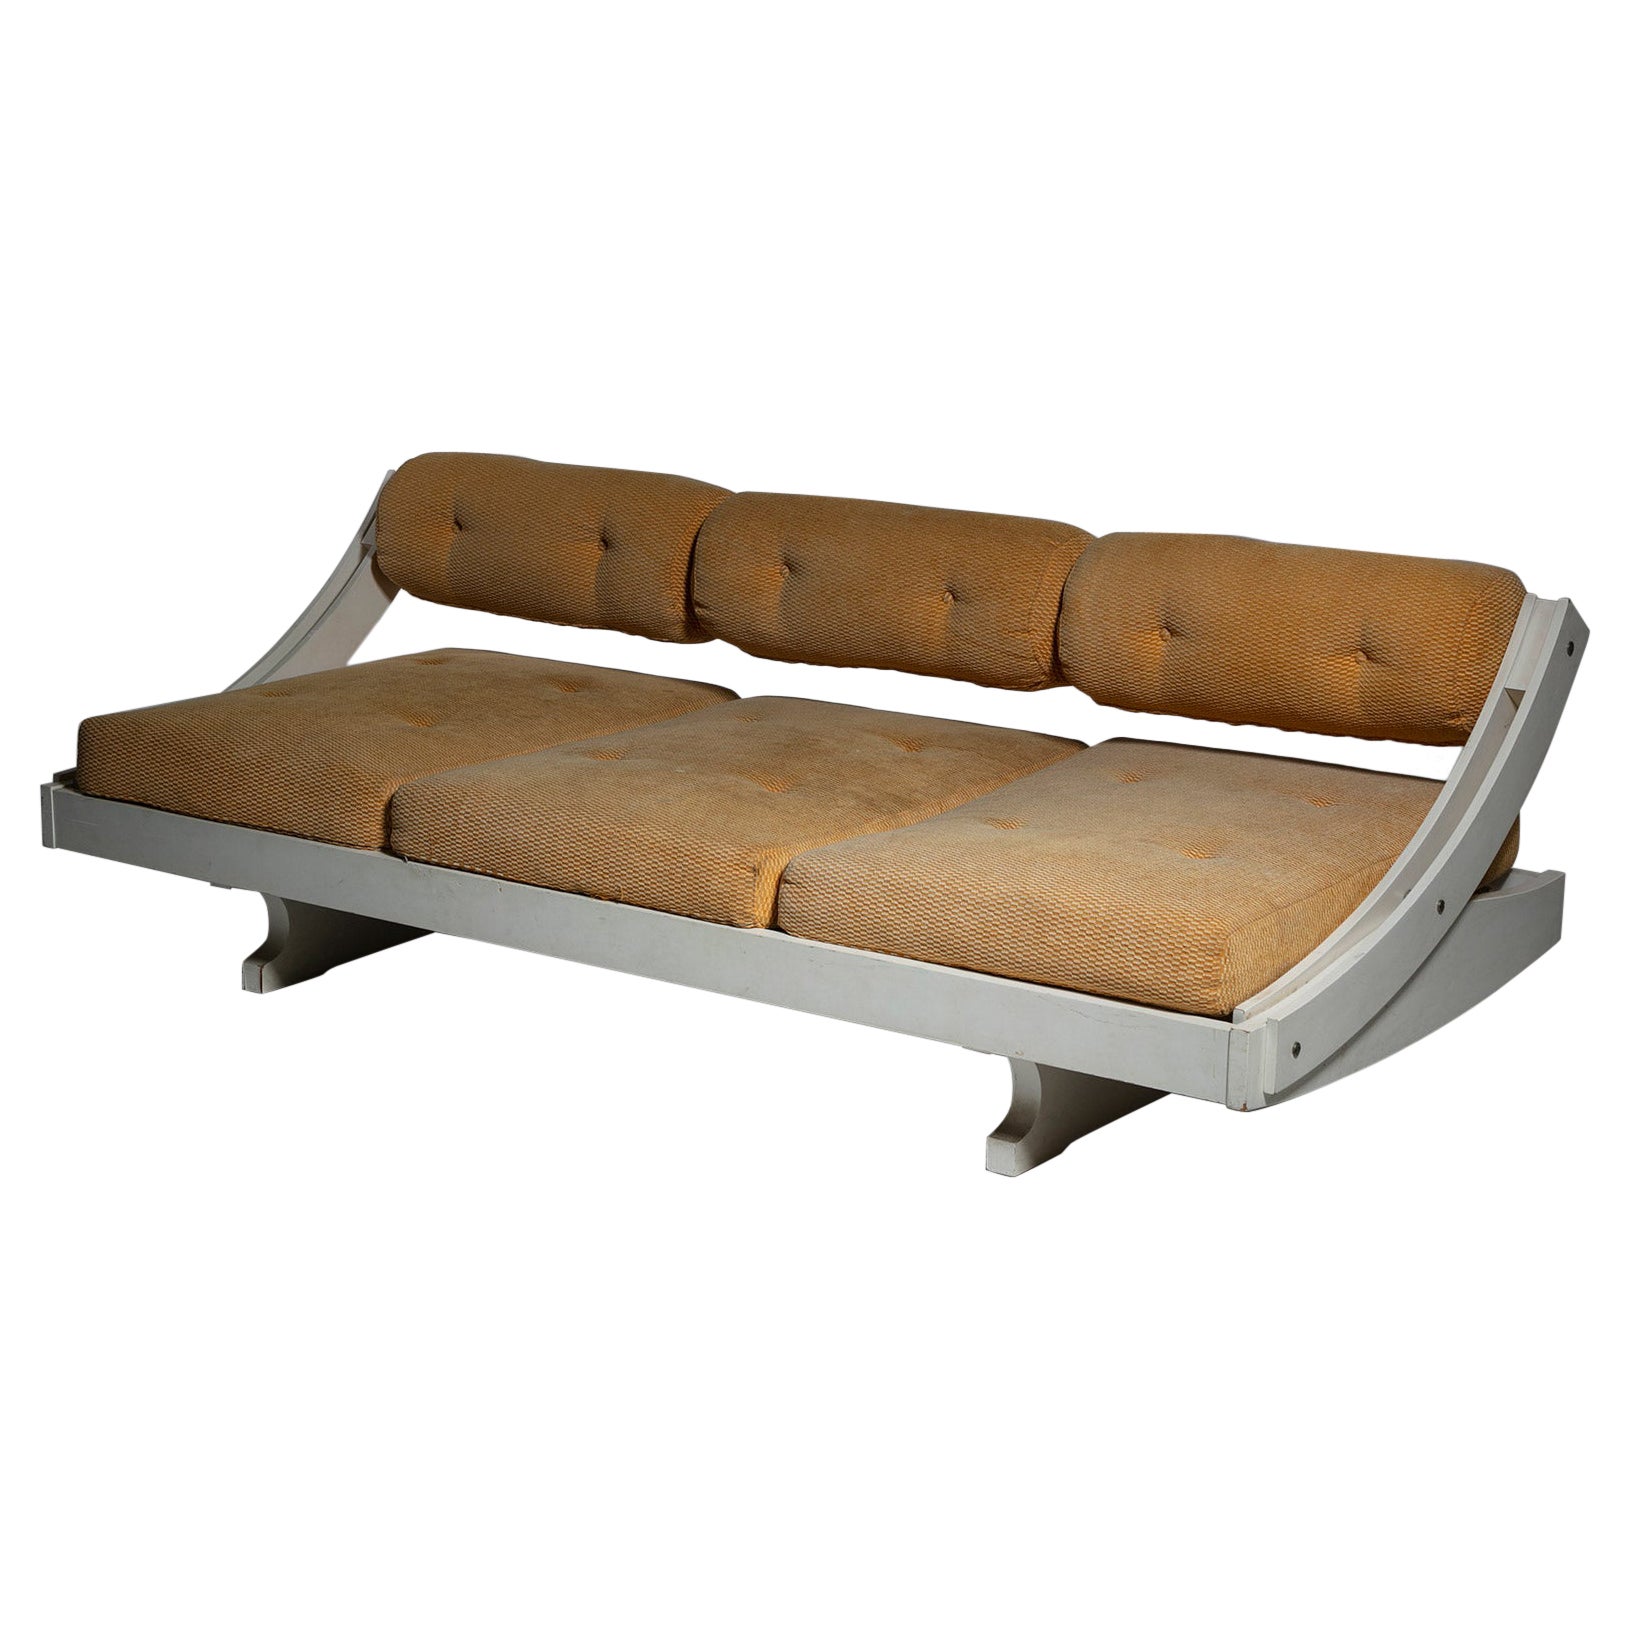 Adjustable White Wood Daybed By Gianni Songia for Sormani, Italy, 1960s For Sale